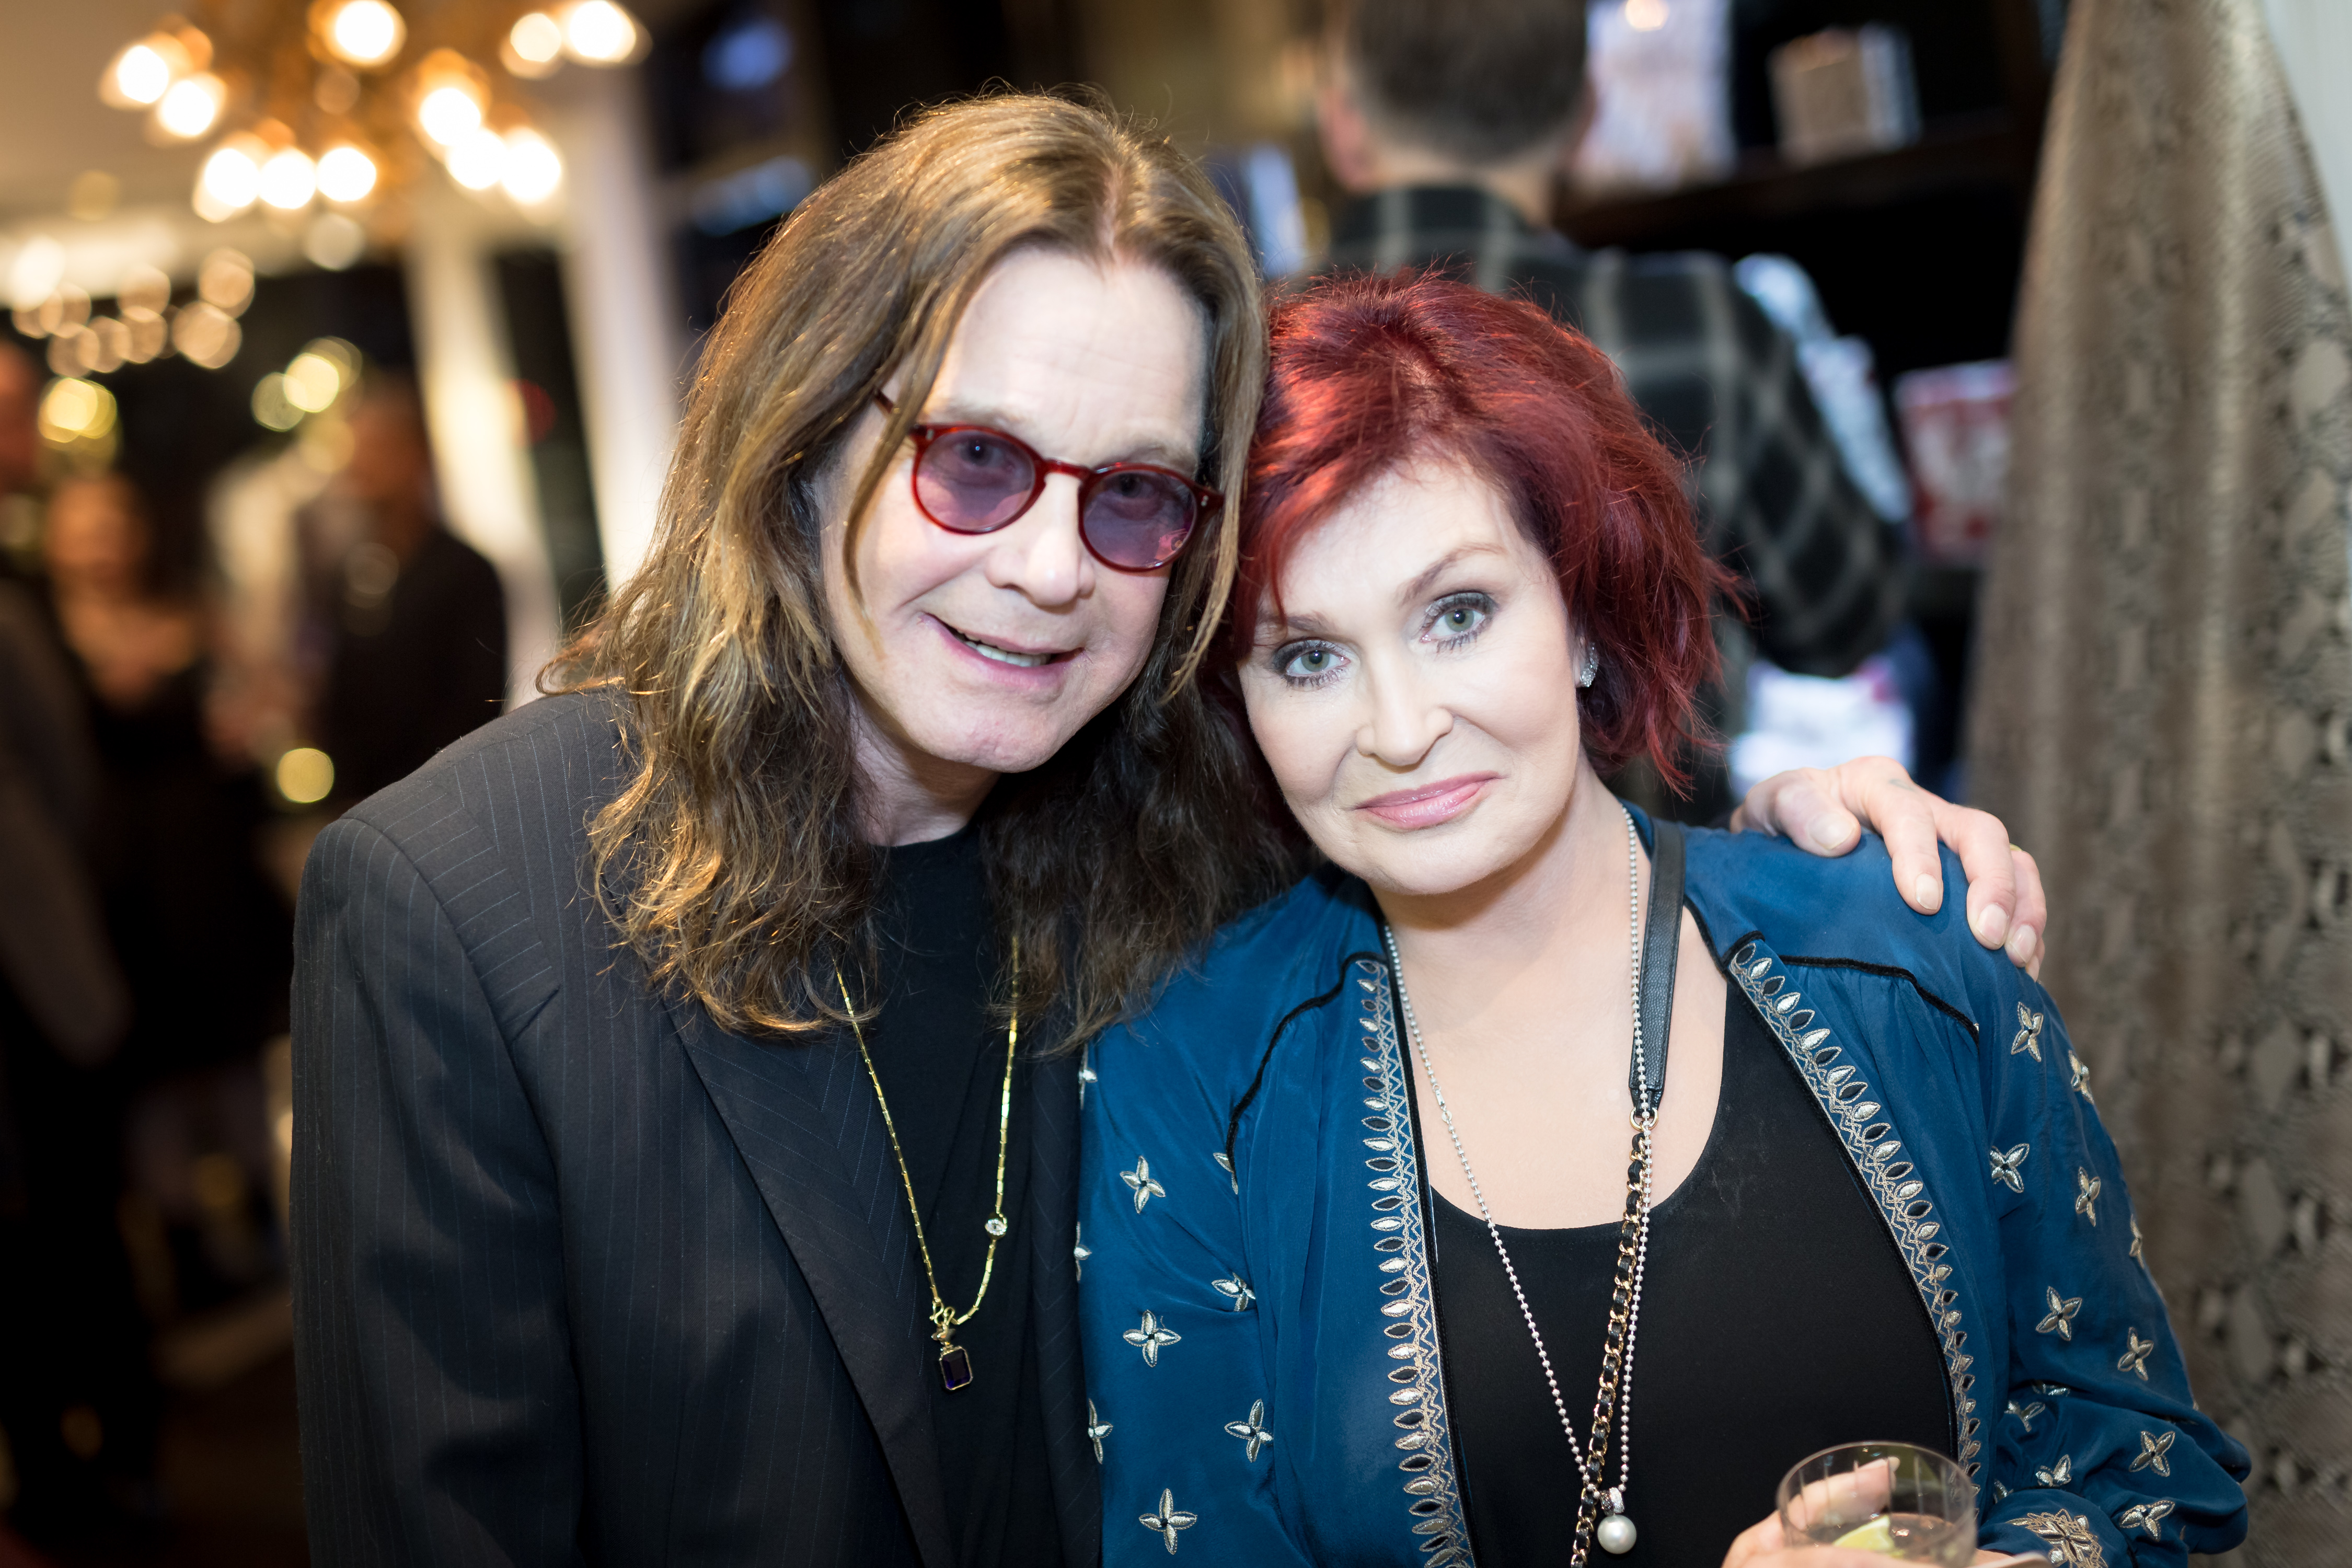 Ozzy Osbourne and Sharon Osbourne on September 28, 2017 in Los Angeles, California | Source: Getty Images